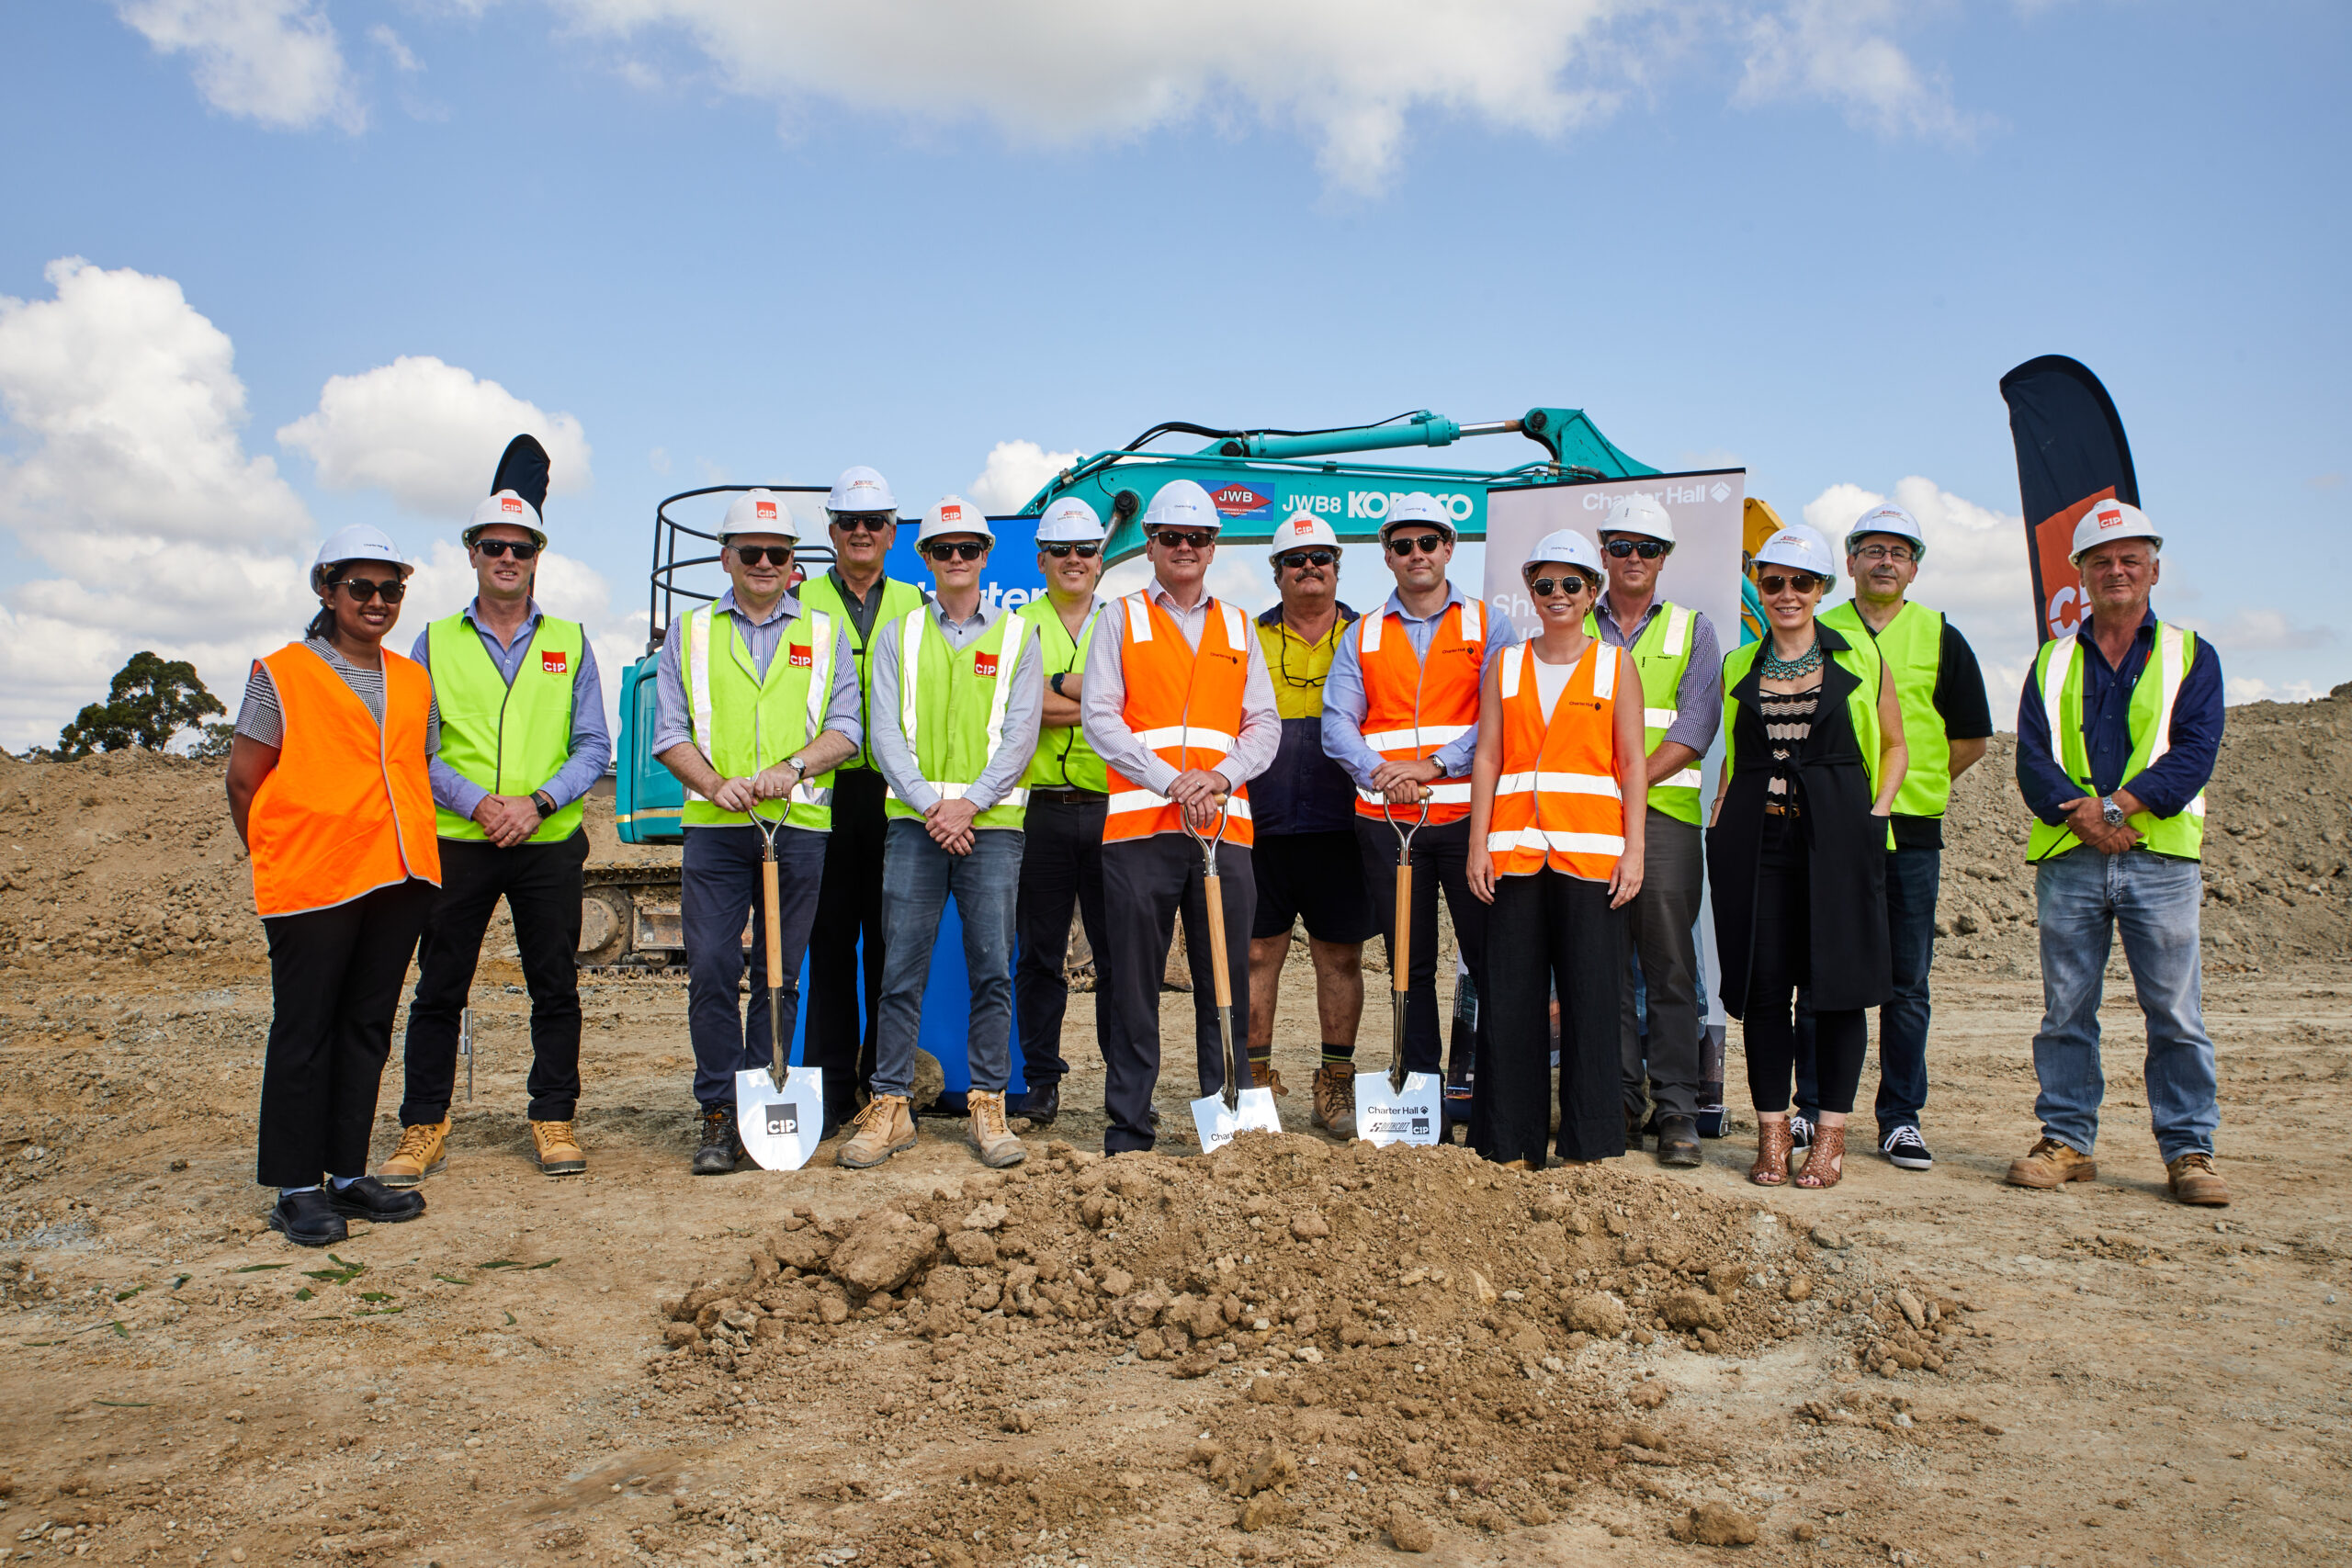 CIP Constructions host Groundbreaking ceremony for Charter Hall and Southcott, ahead of new build on Charter Hall’s Connectwest Industrial Park.